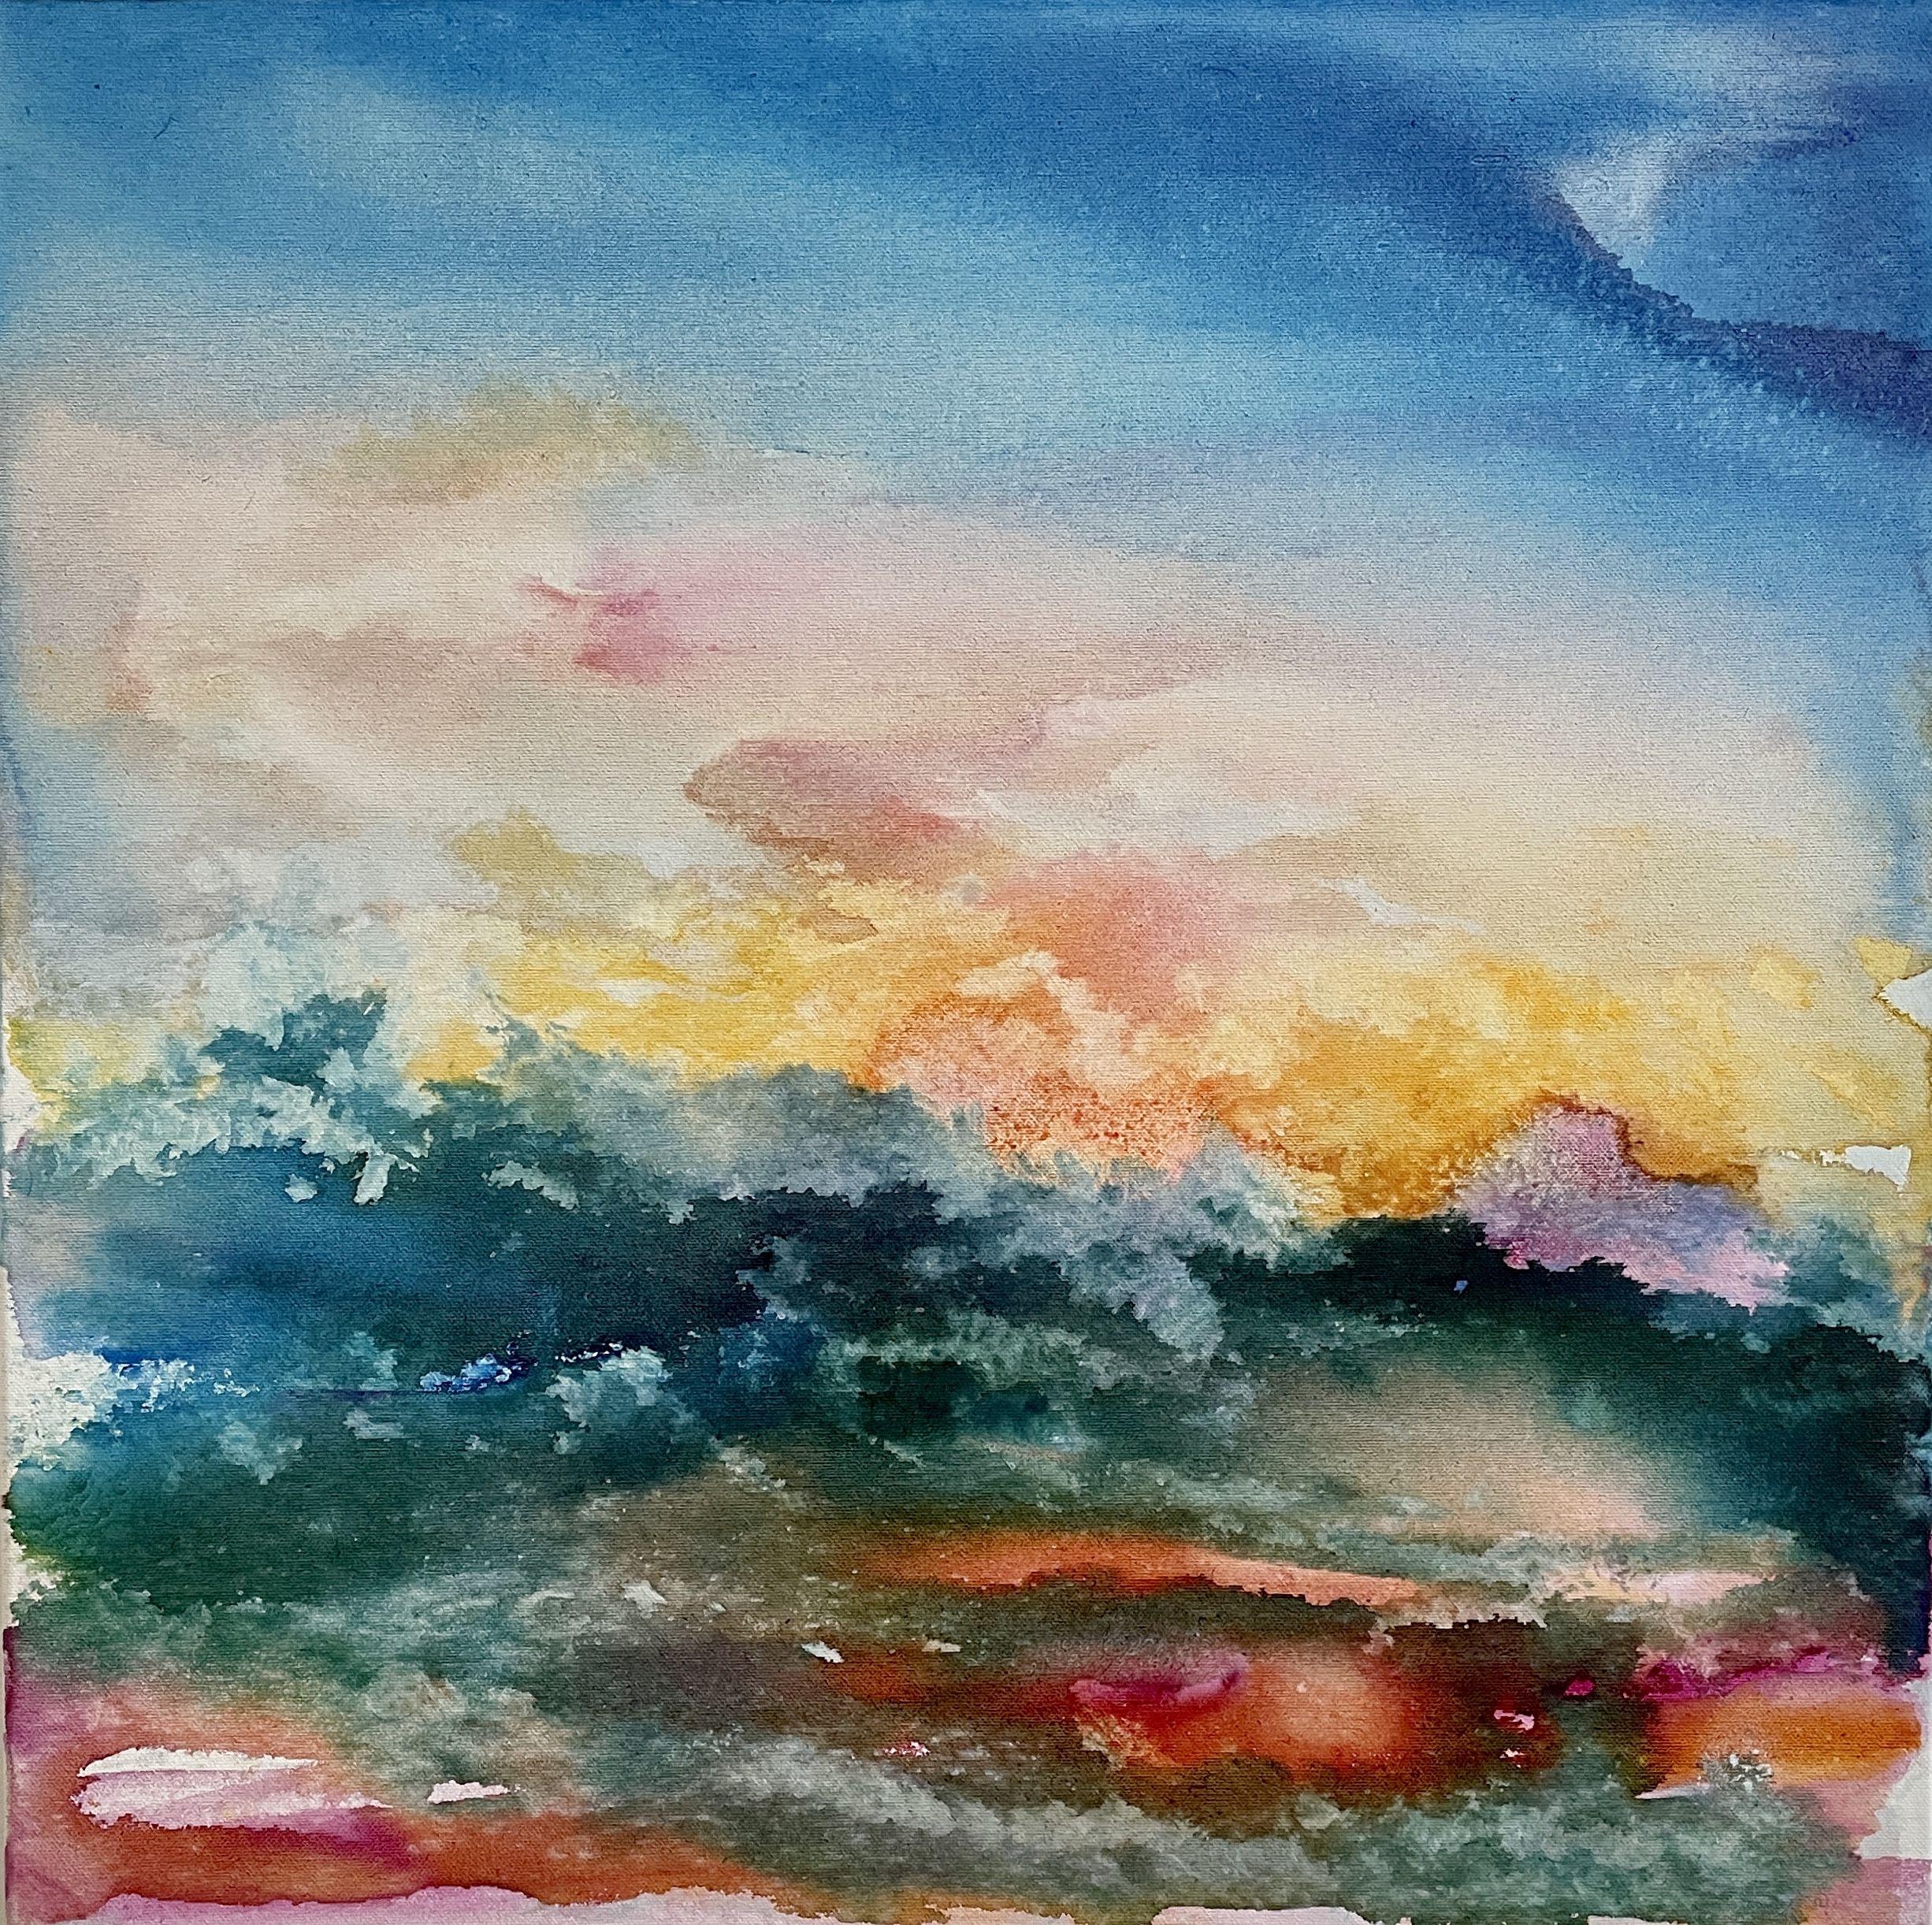 Stormy Times, Painting, Watercolor on Canvas - Art by Gesa Reuter